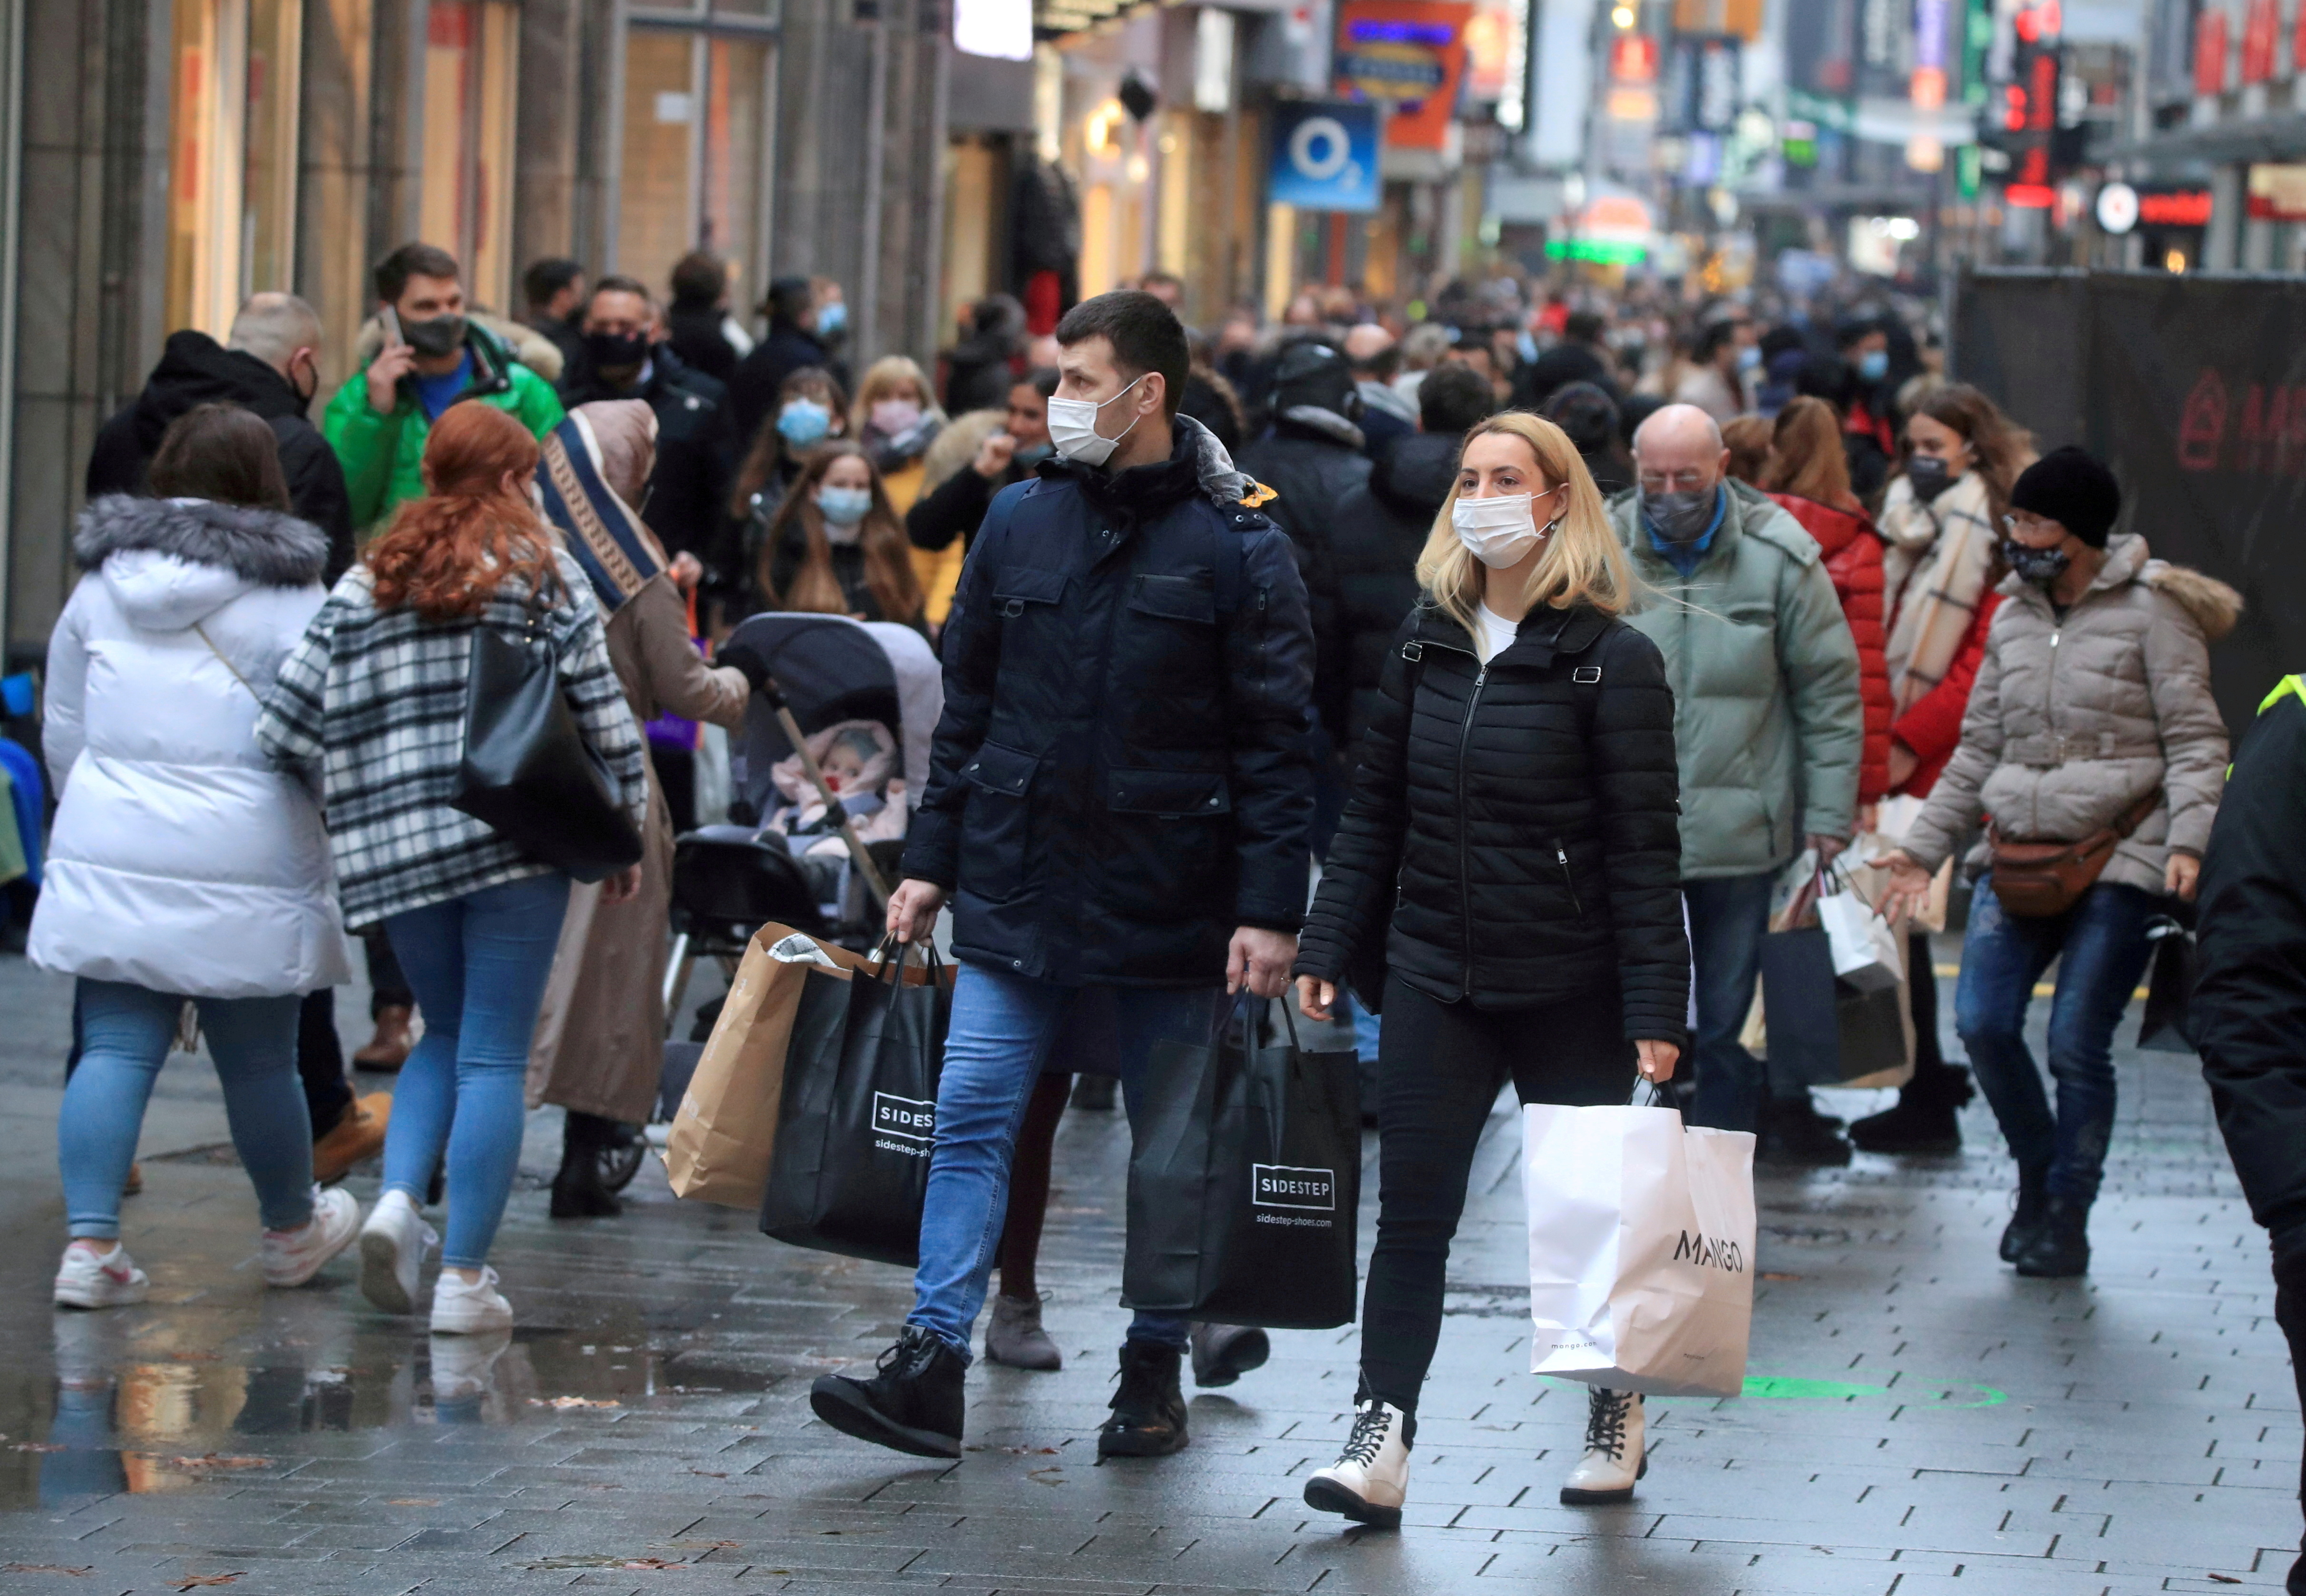 Shoppers in Cologne, Germany